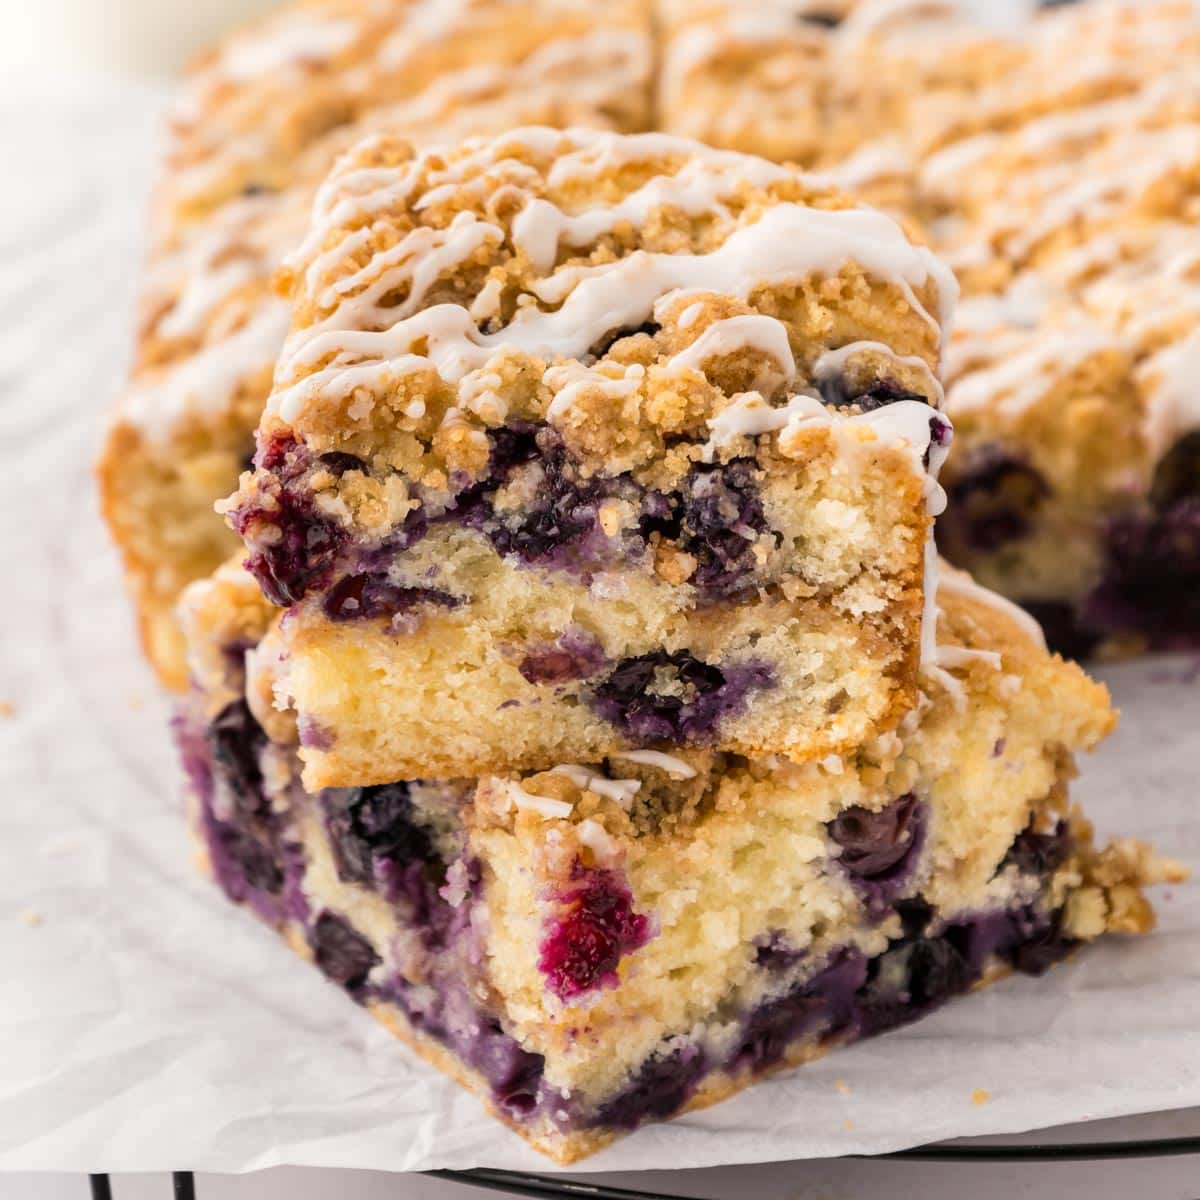 Two slices of blueberry coffee cake stacked on top of each other with the rest of the cake in the background.